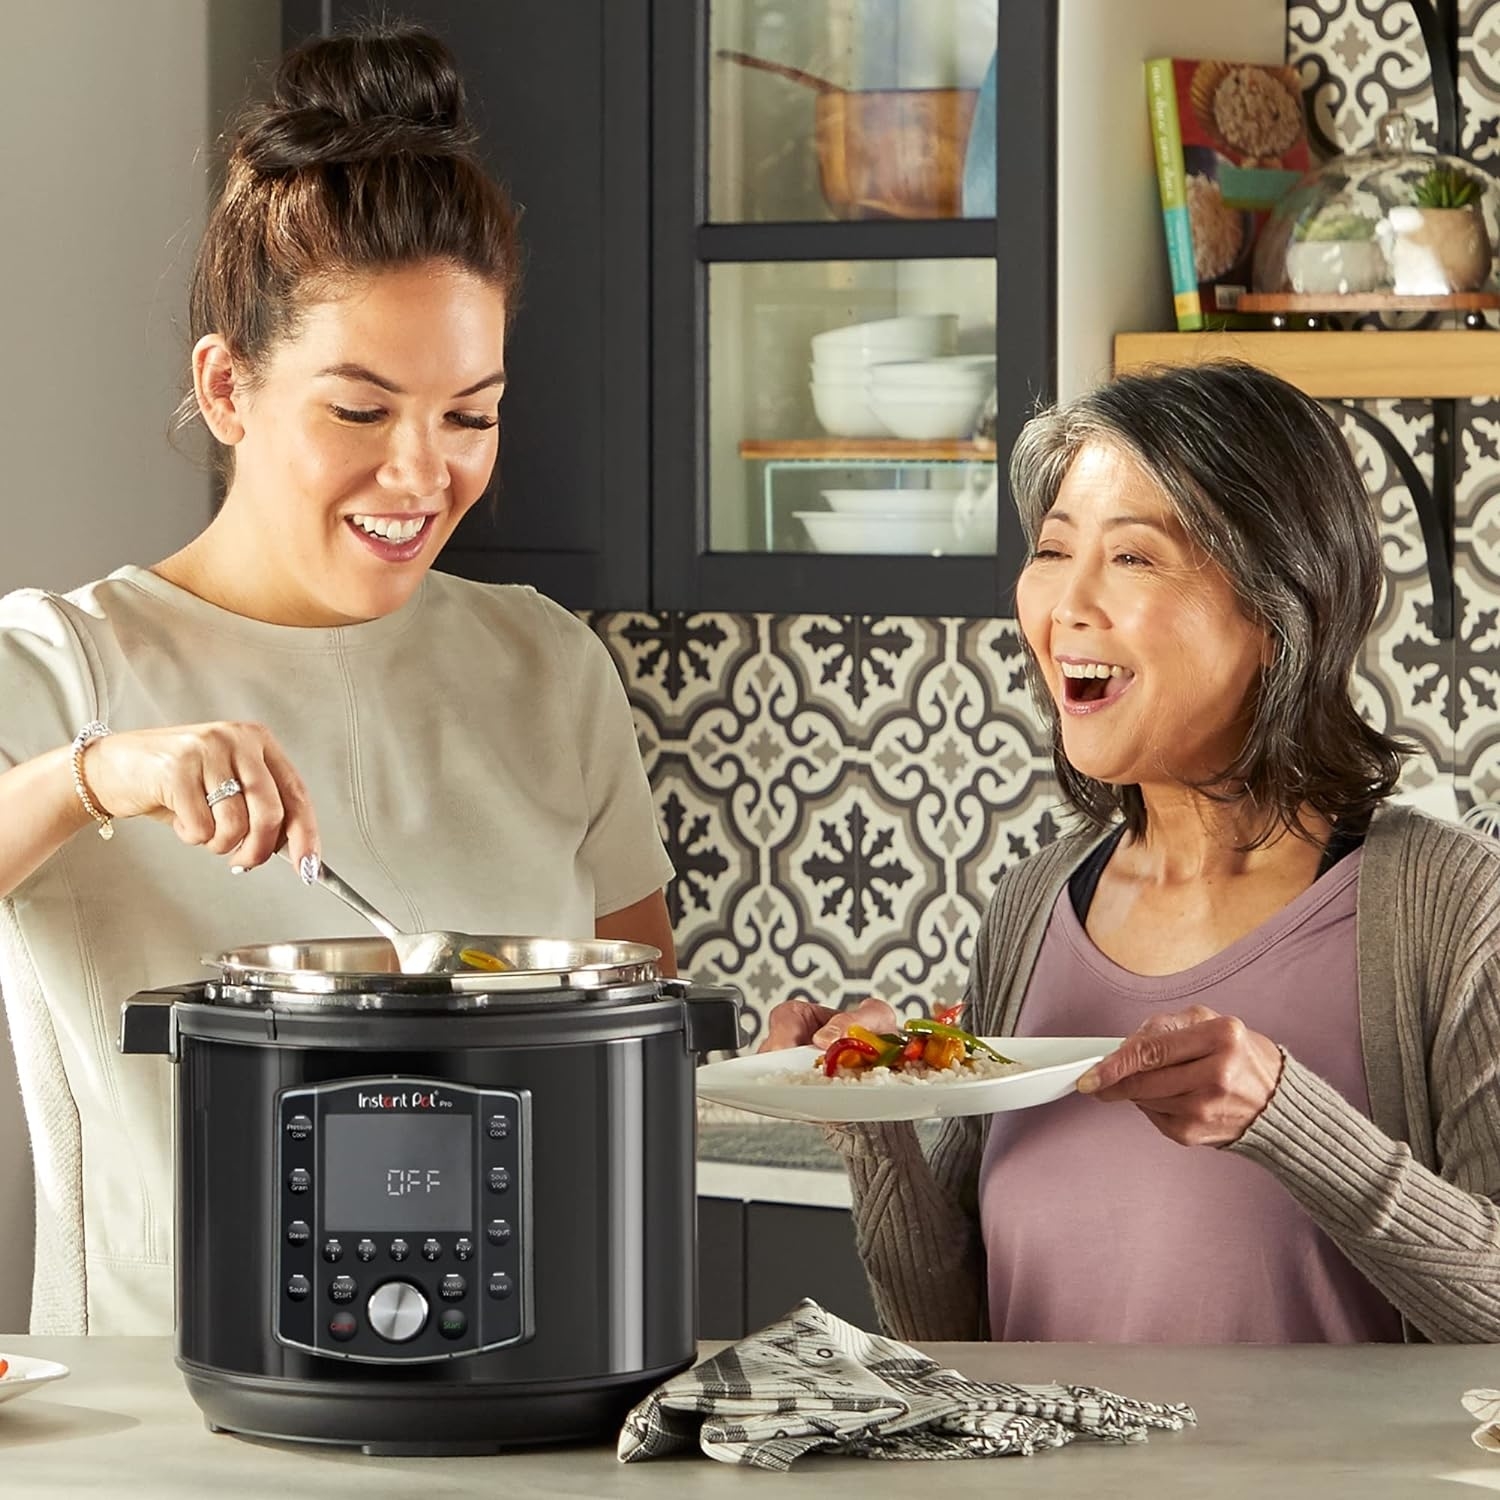 Two women cooking together with a modern electric pressure cooker in a home kitchen